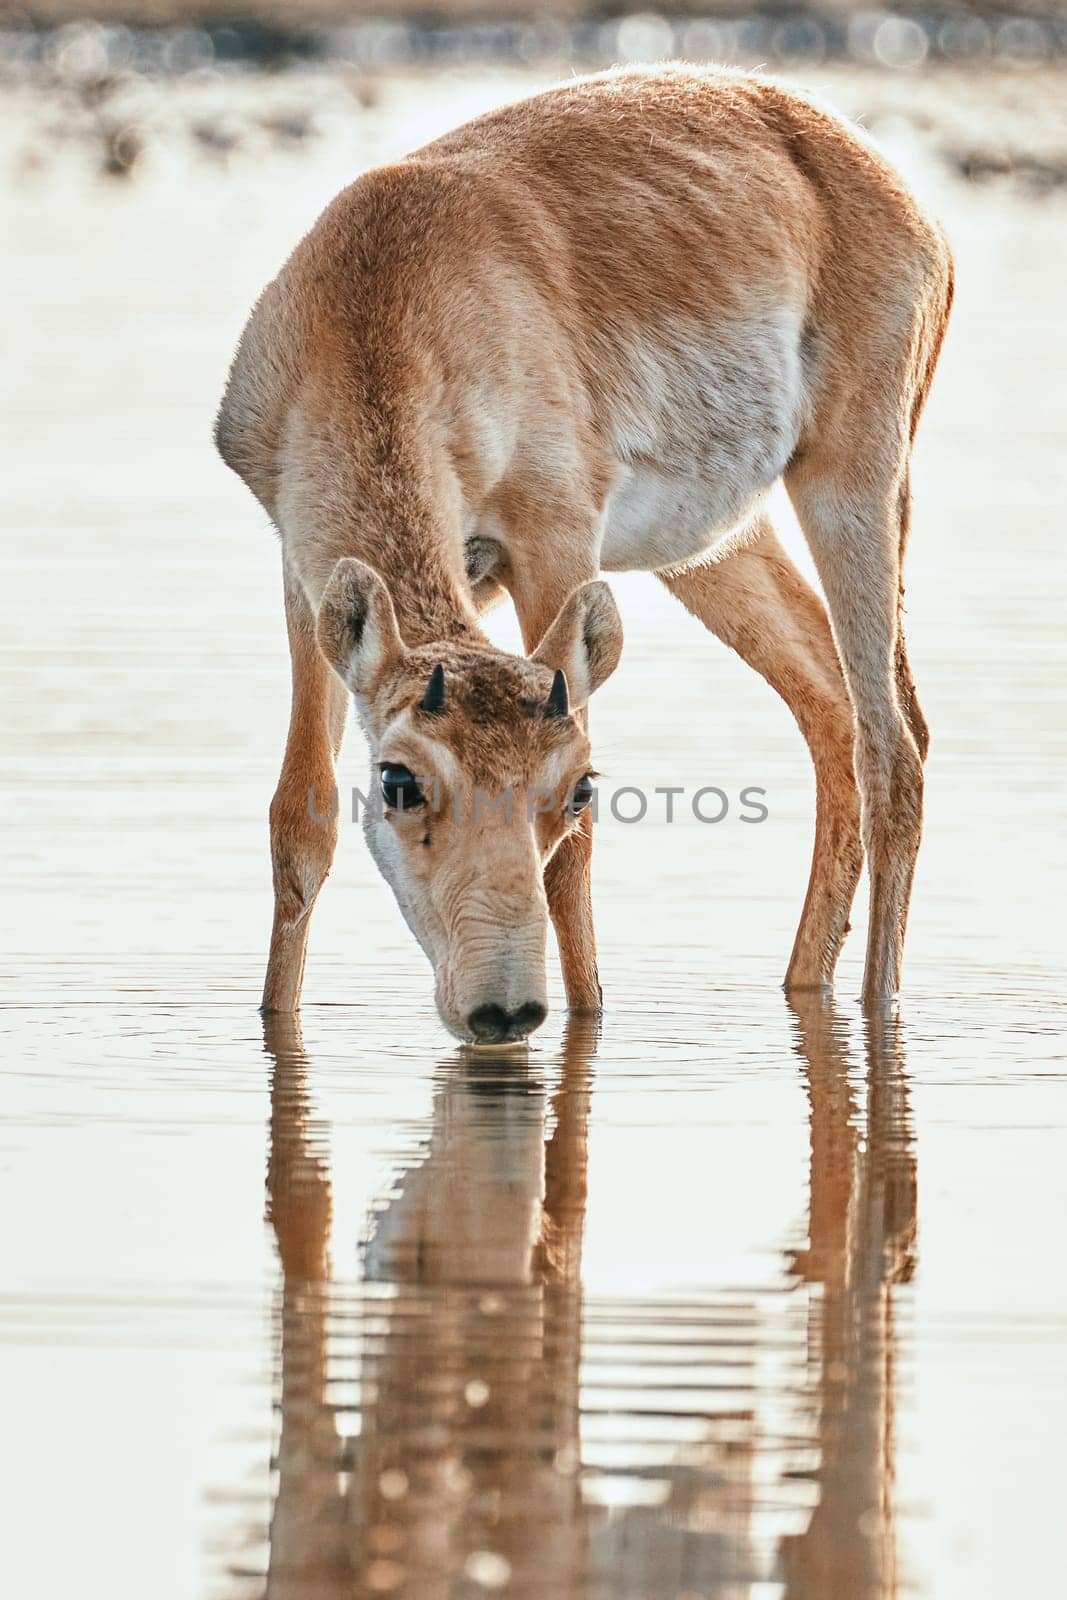 A young male saiga antelope standing in the water, at a watering hole. Portret of wild antelope in the steppe. Saiga tatarica antelope near waterhole. endangered species saiga.